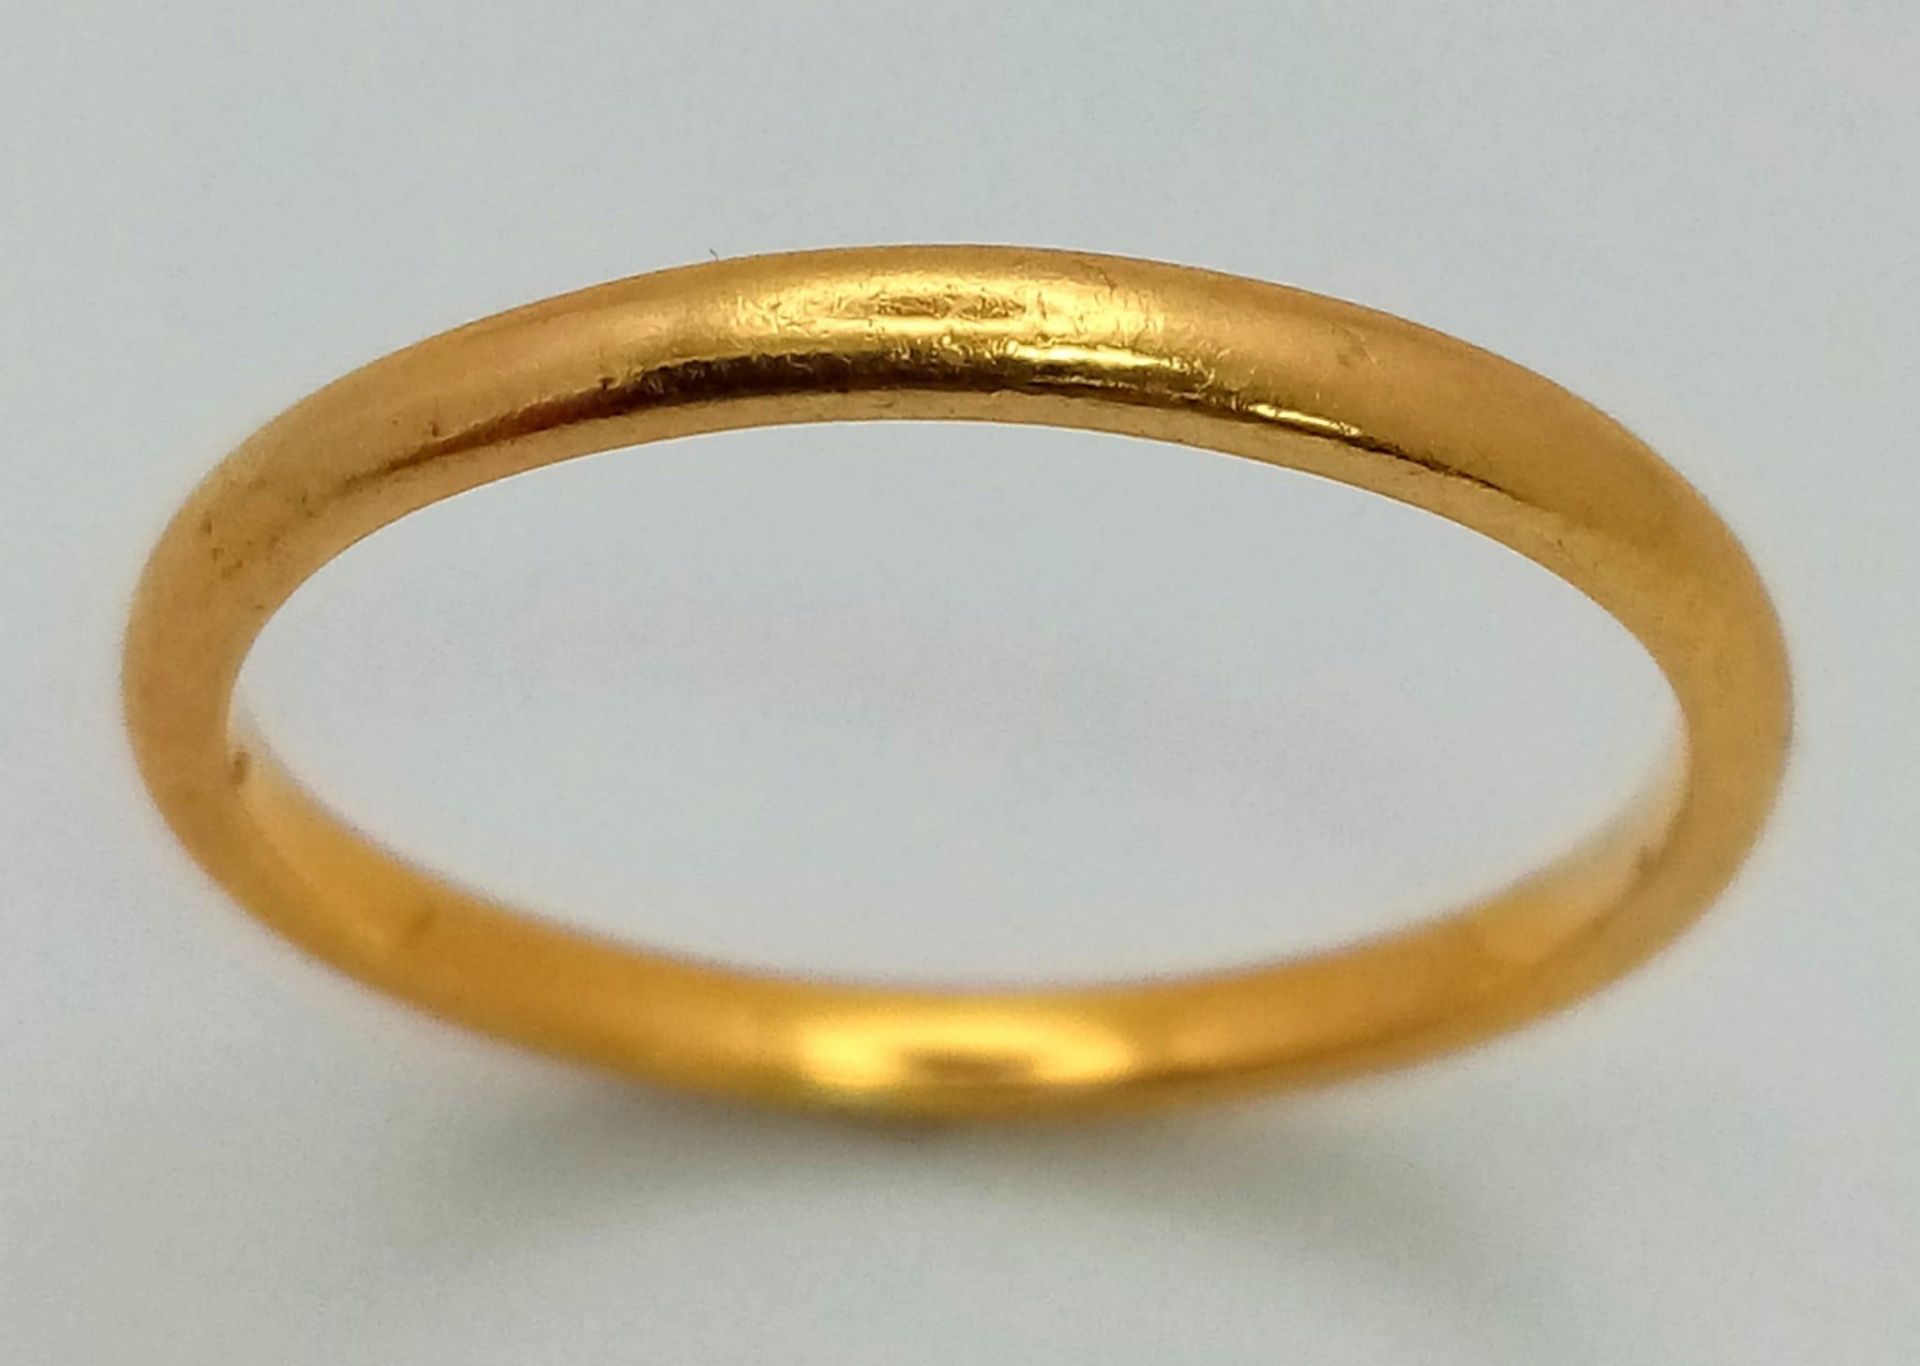 A Vintage 22K Yellow Gold Thin Band Ring. Size M. 1.84g - Image 2 of 4